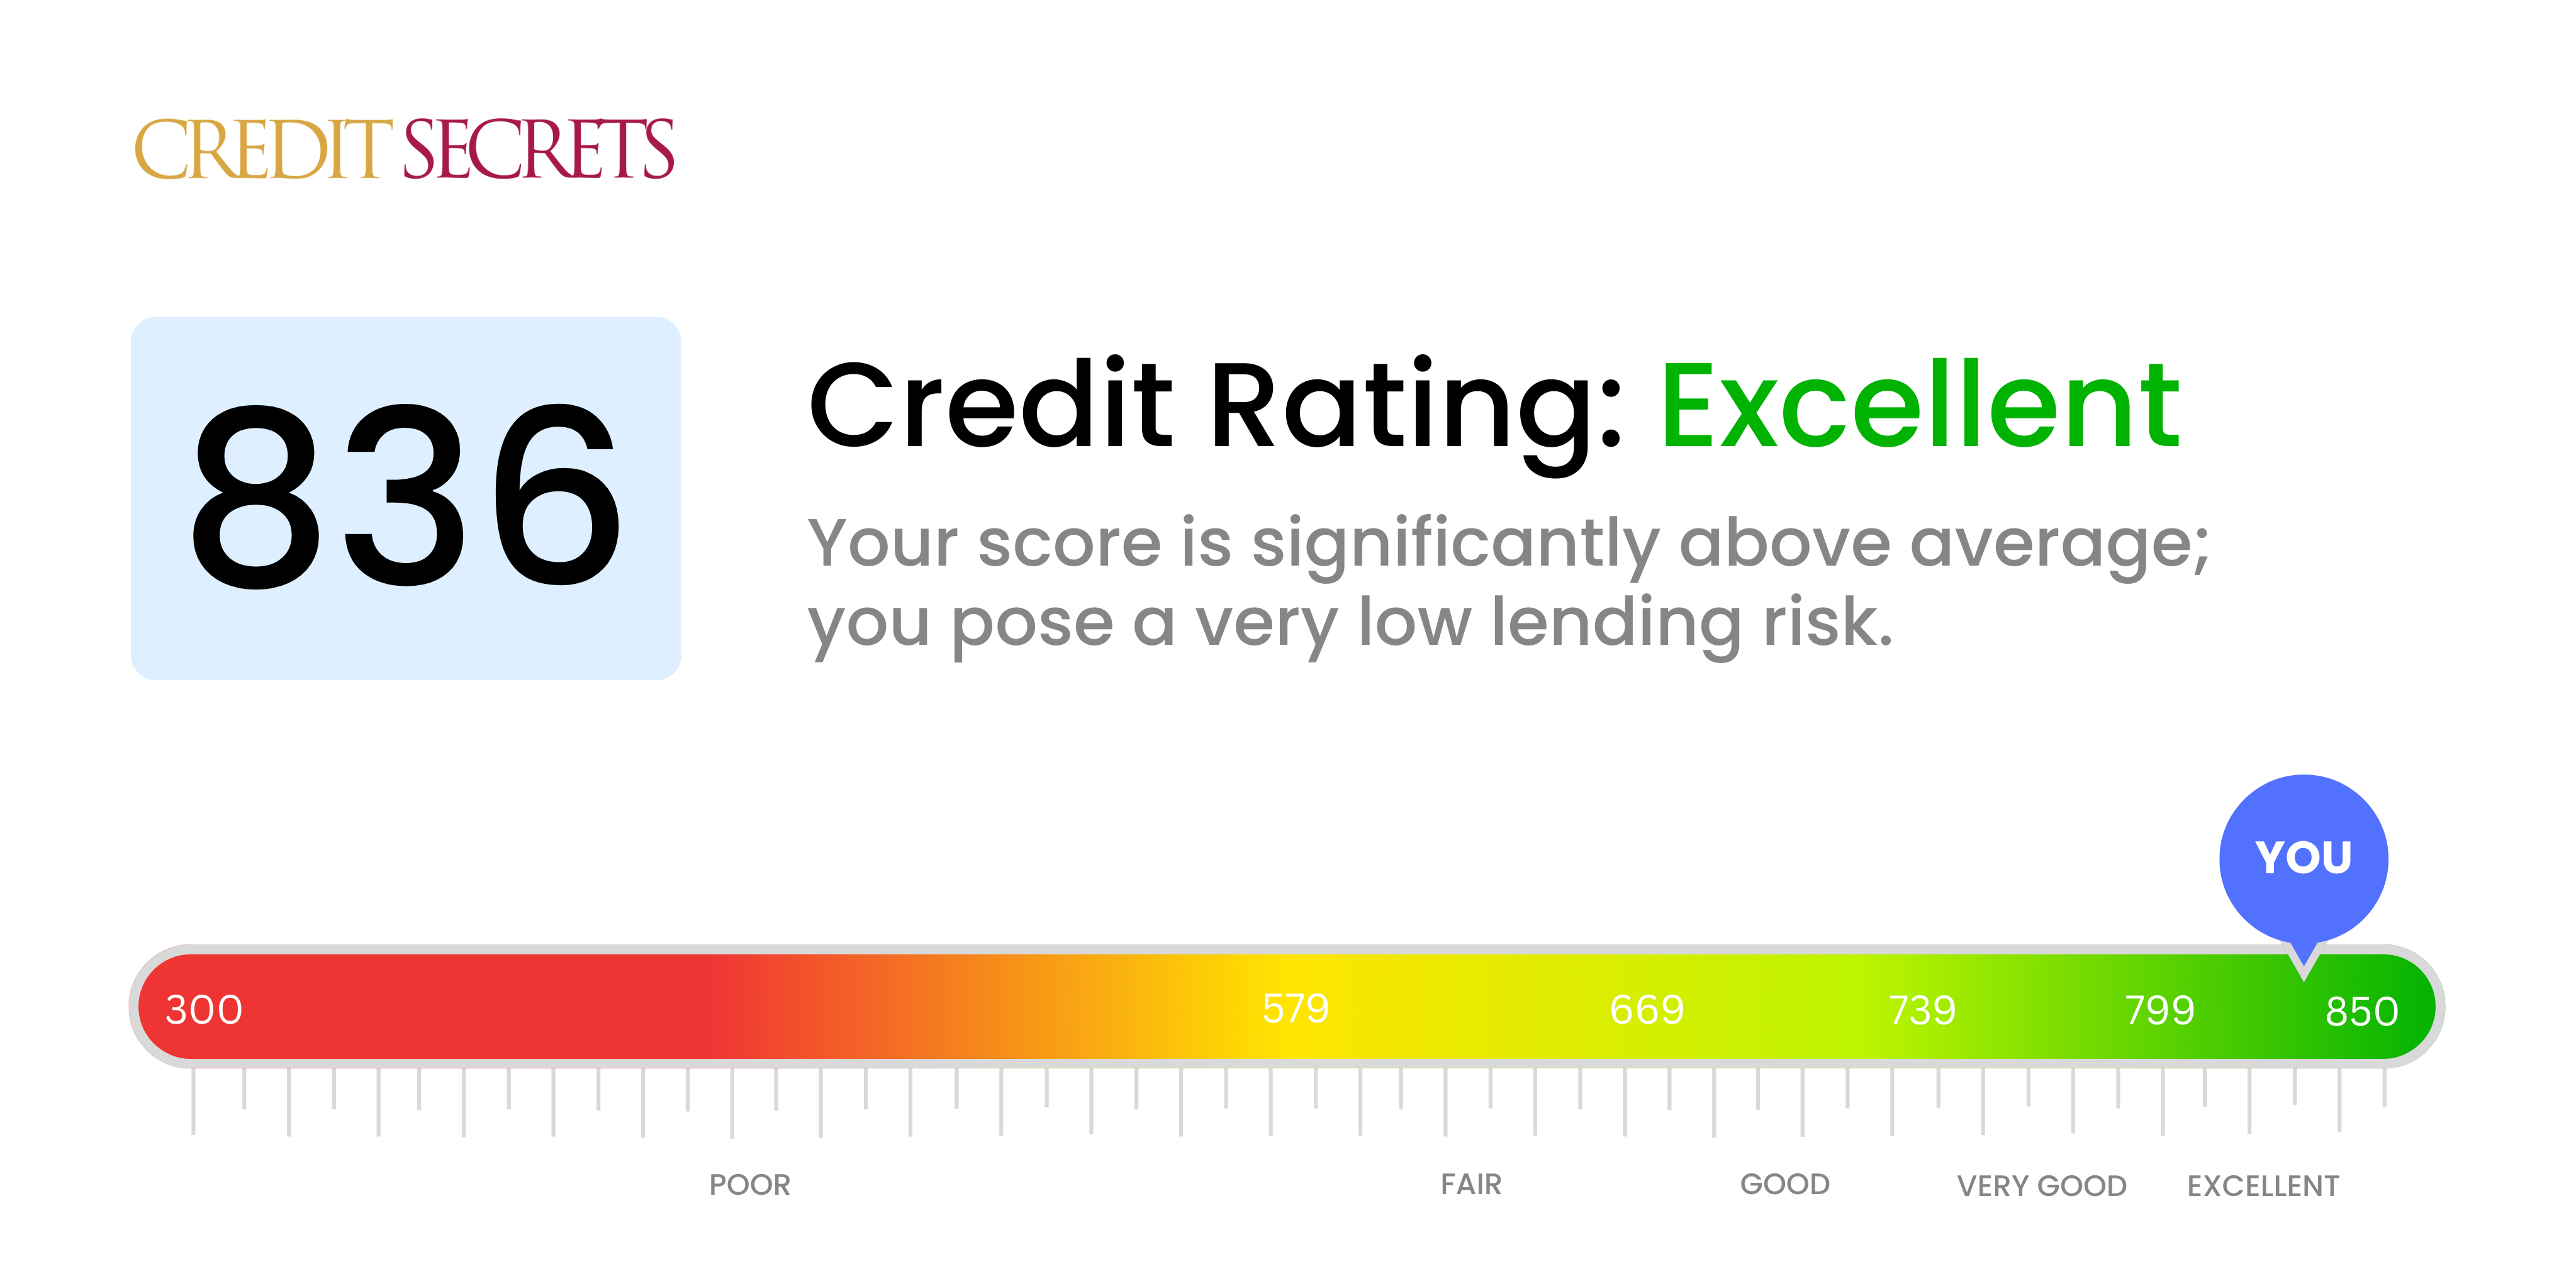 Is 836 a good credit score?